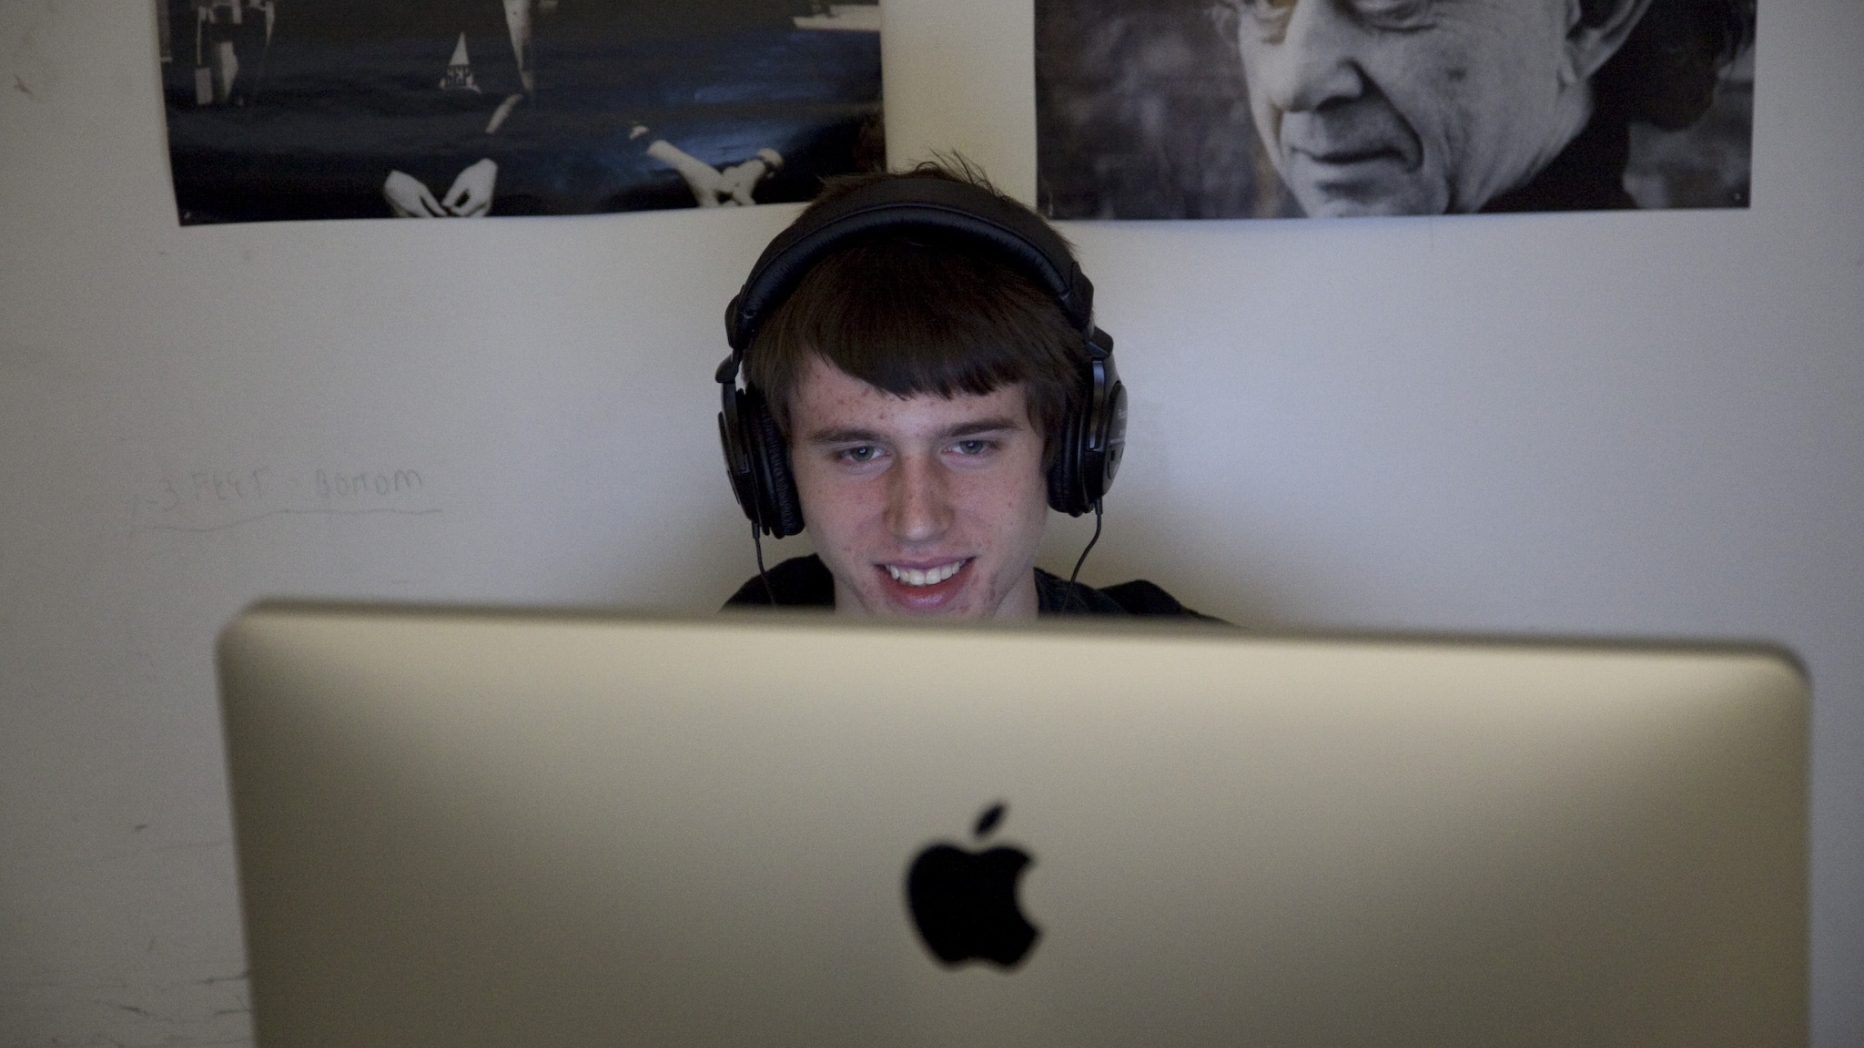 Student wearing headphones looking at a computer and smiling.